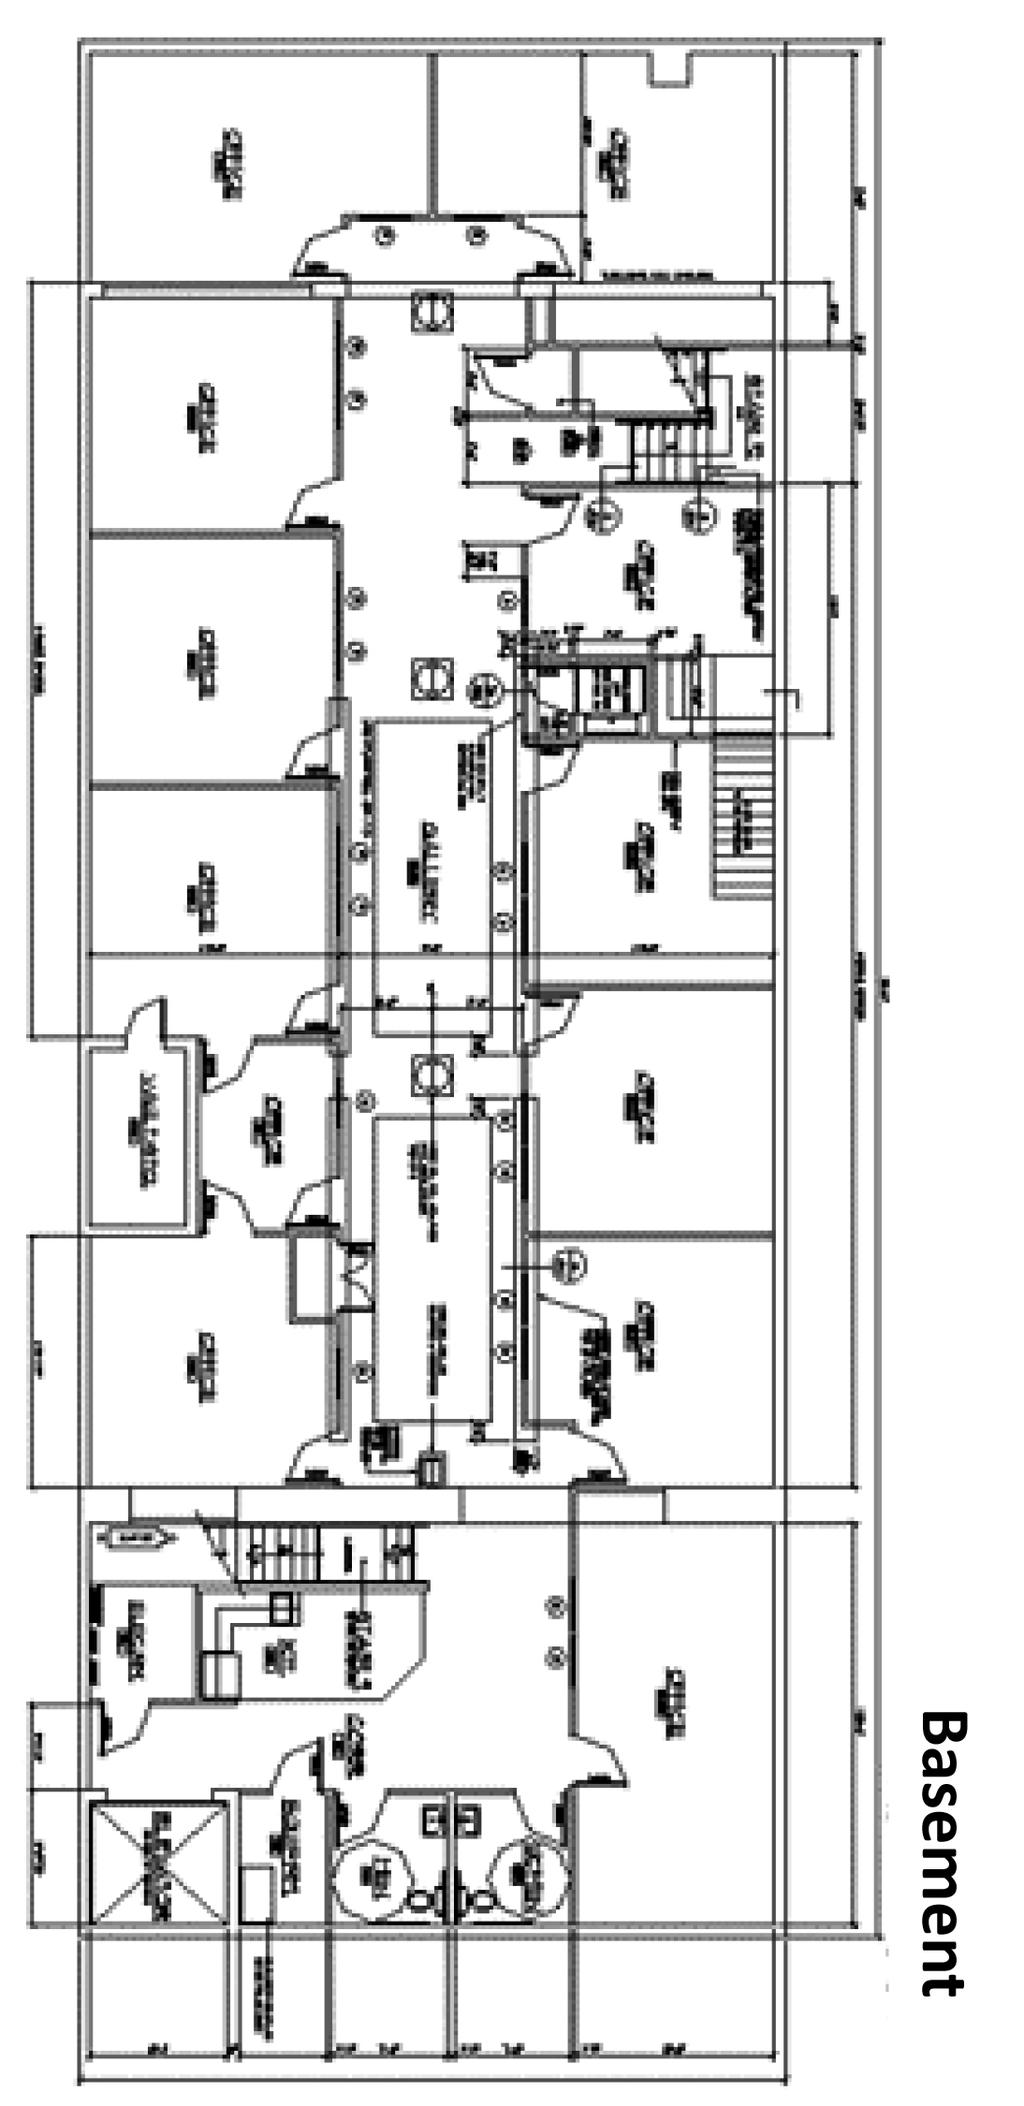 Property Layout *The floor plan was not supplied by the Seller, but rather a 3 rd party; such information on the floor plan has not been verified and may not reflect the current layout.